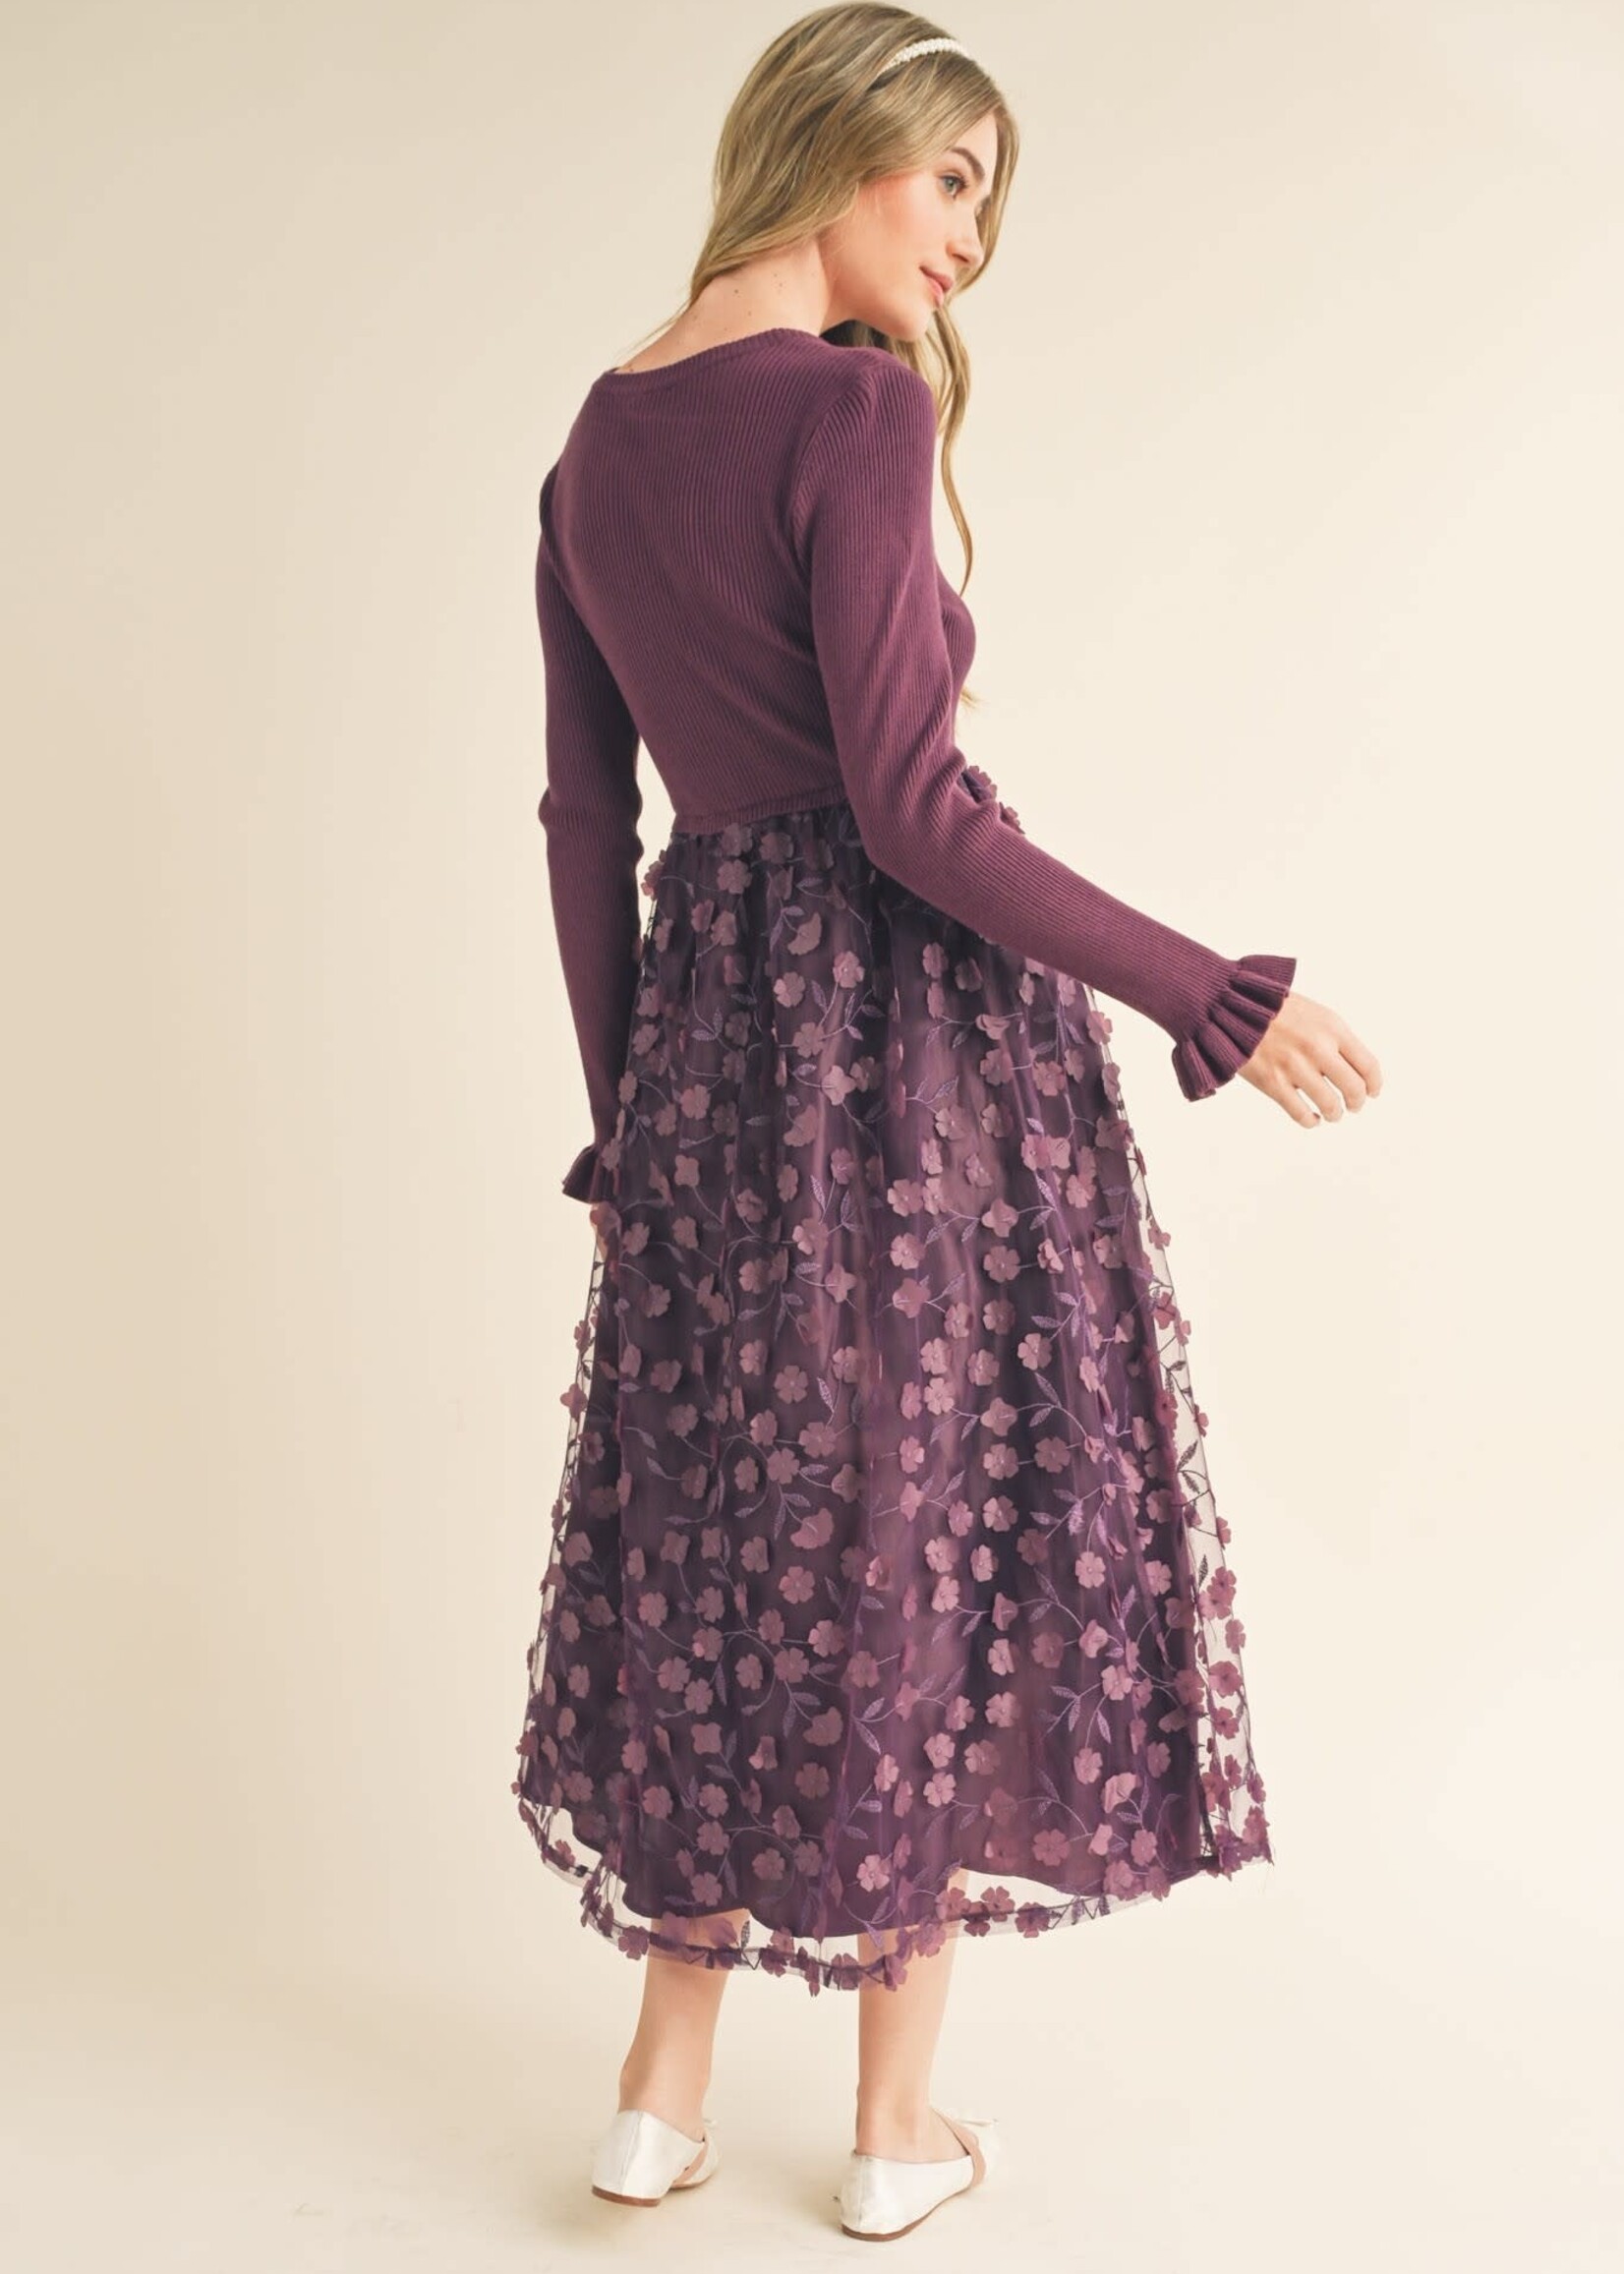 Long sleeve ribbed top dress with texture floral bottom